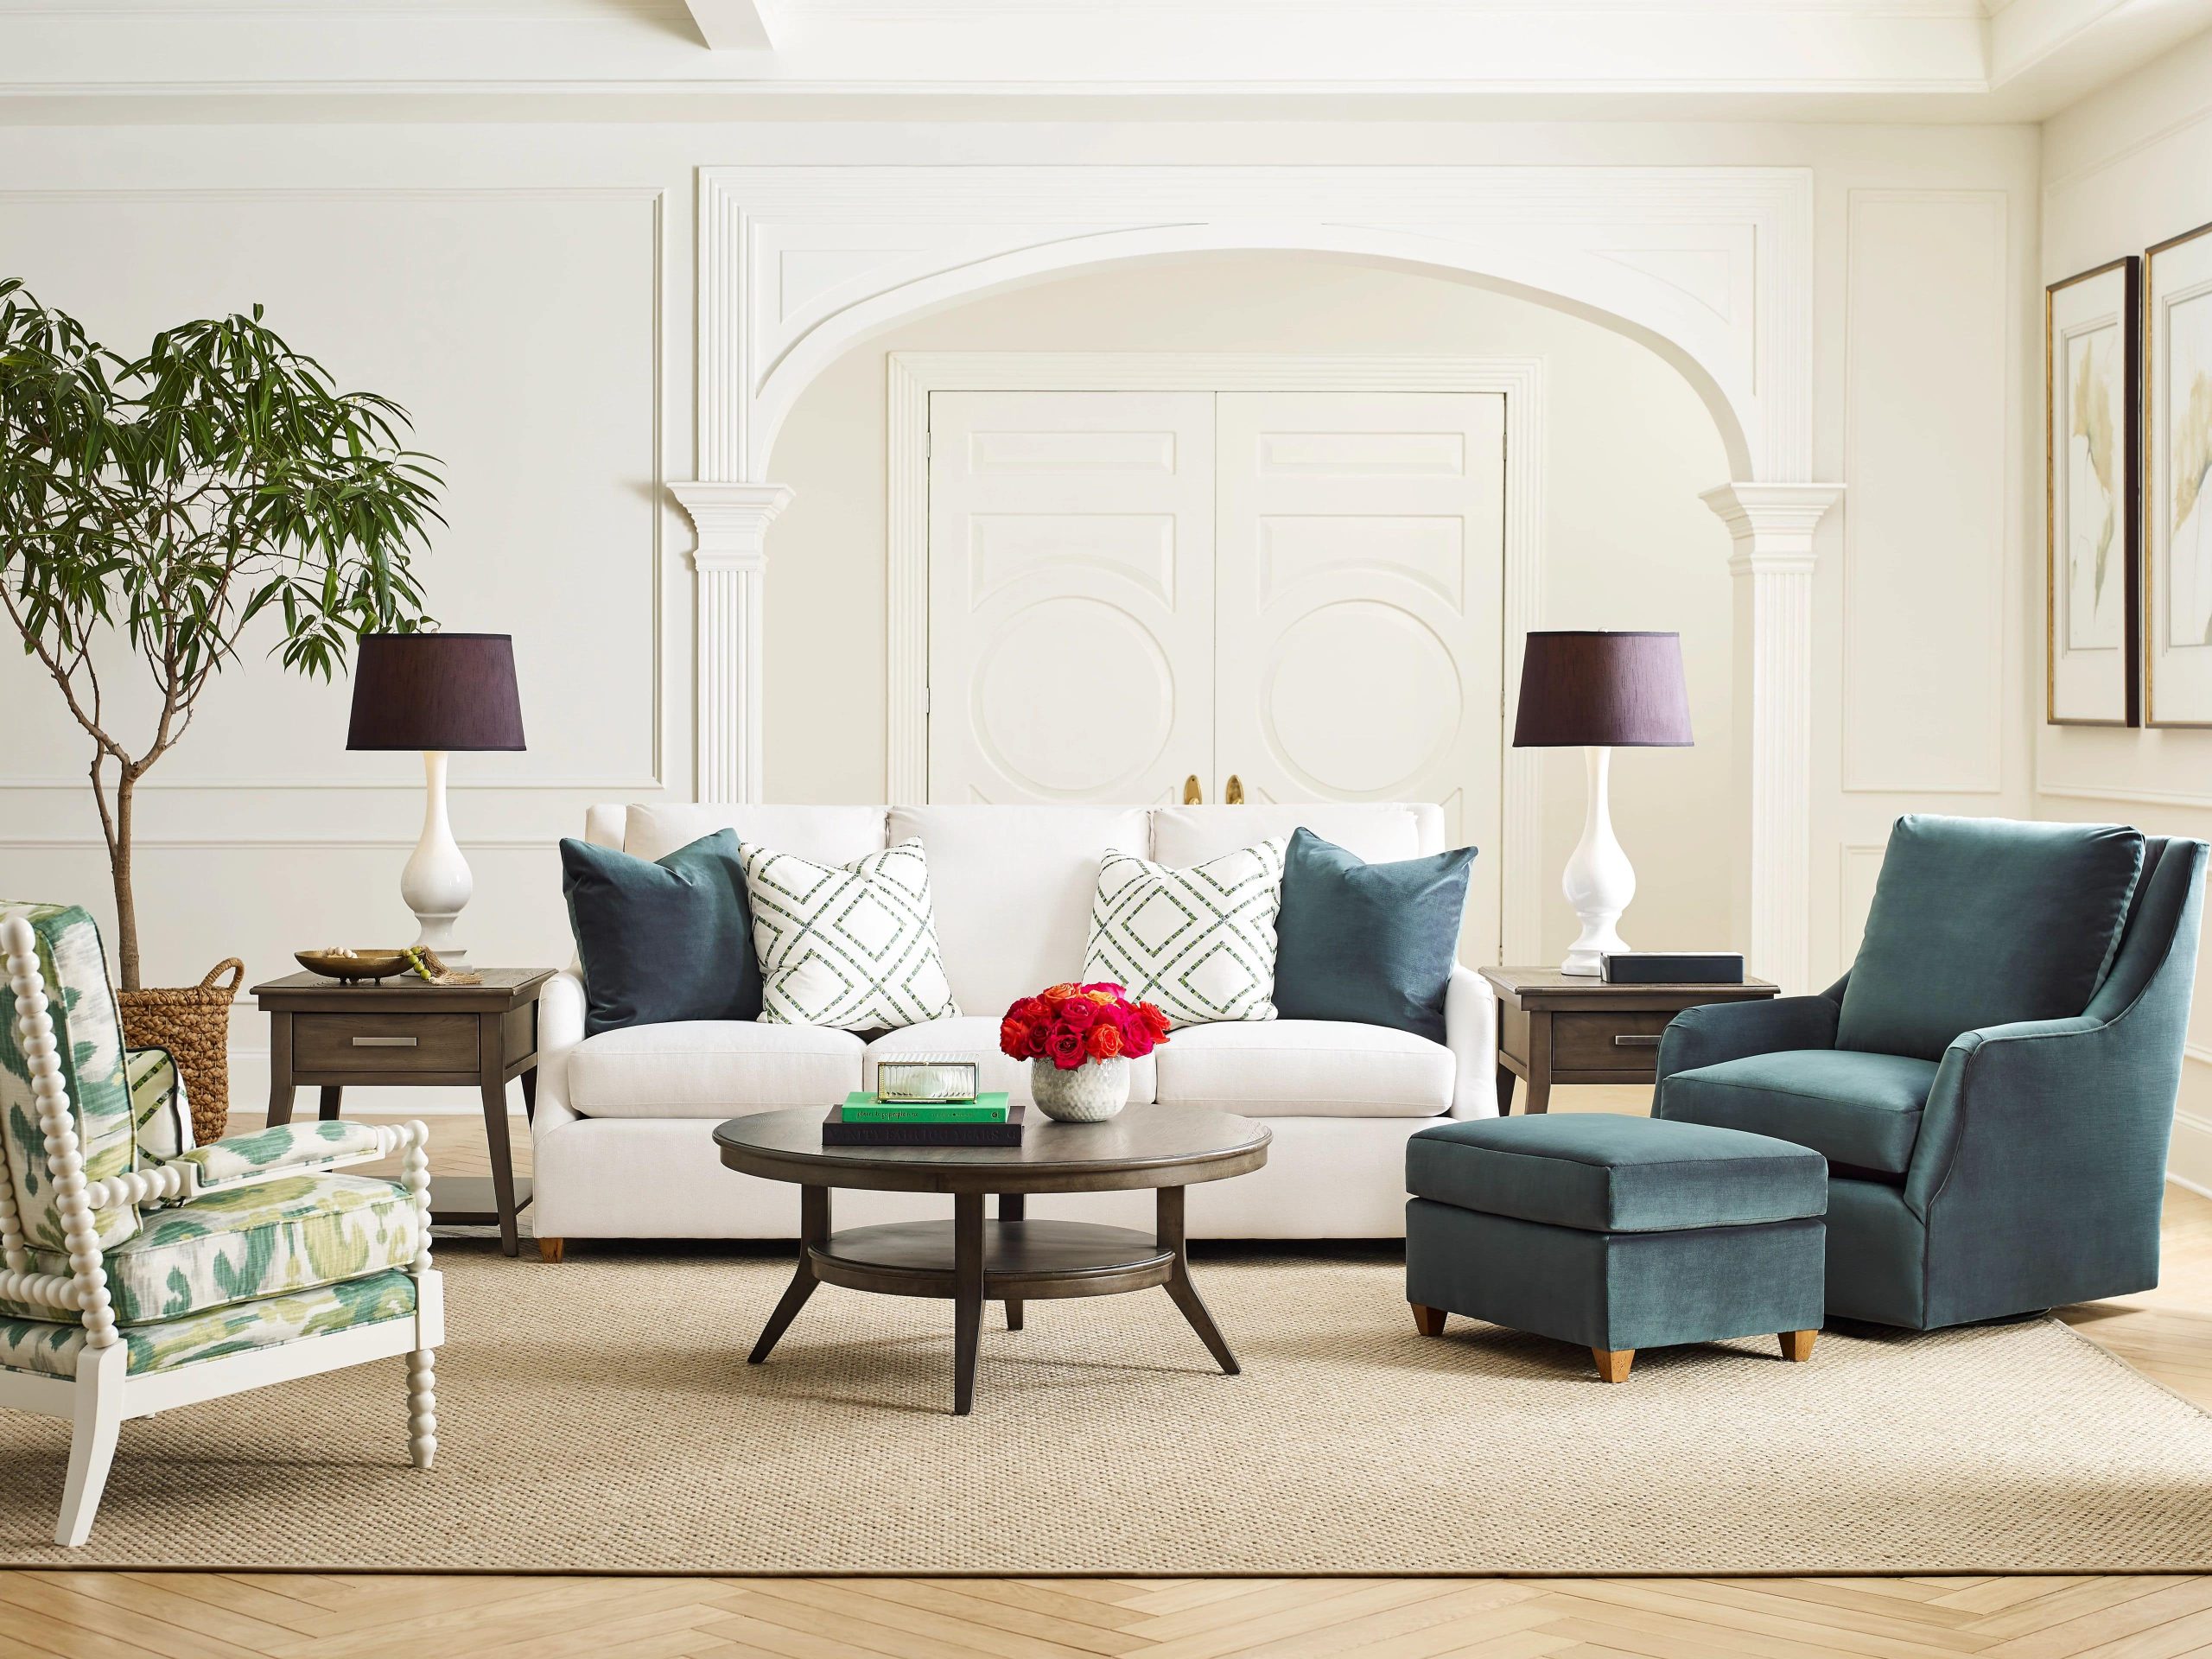 A living room layout featuring a Kincaid sofa from EF Brannon.